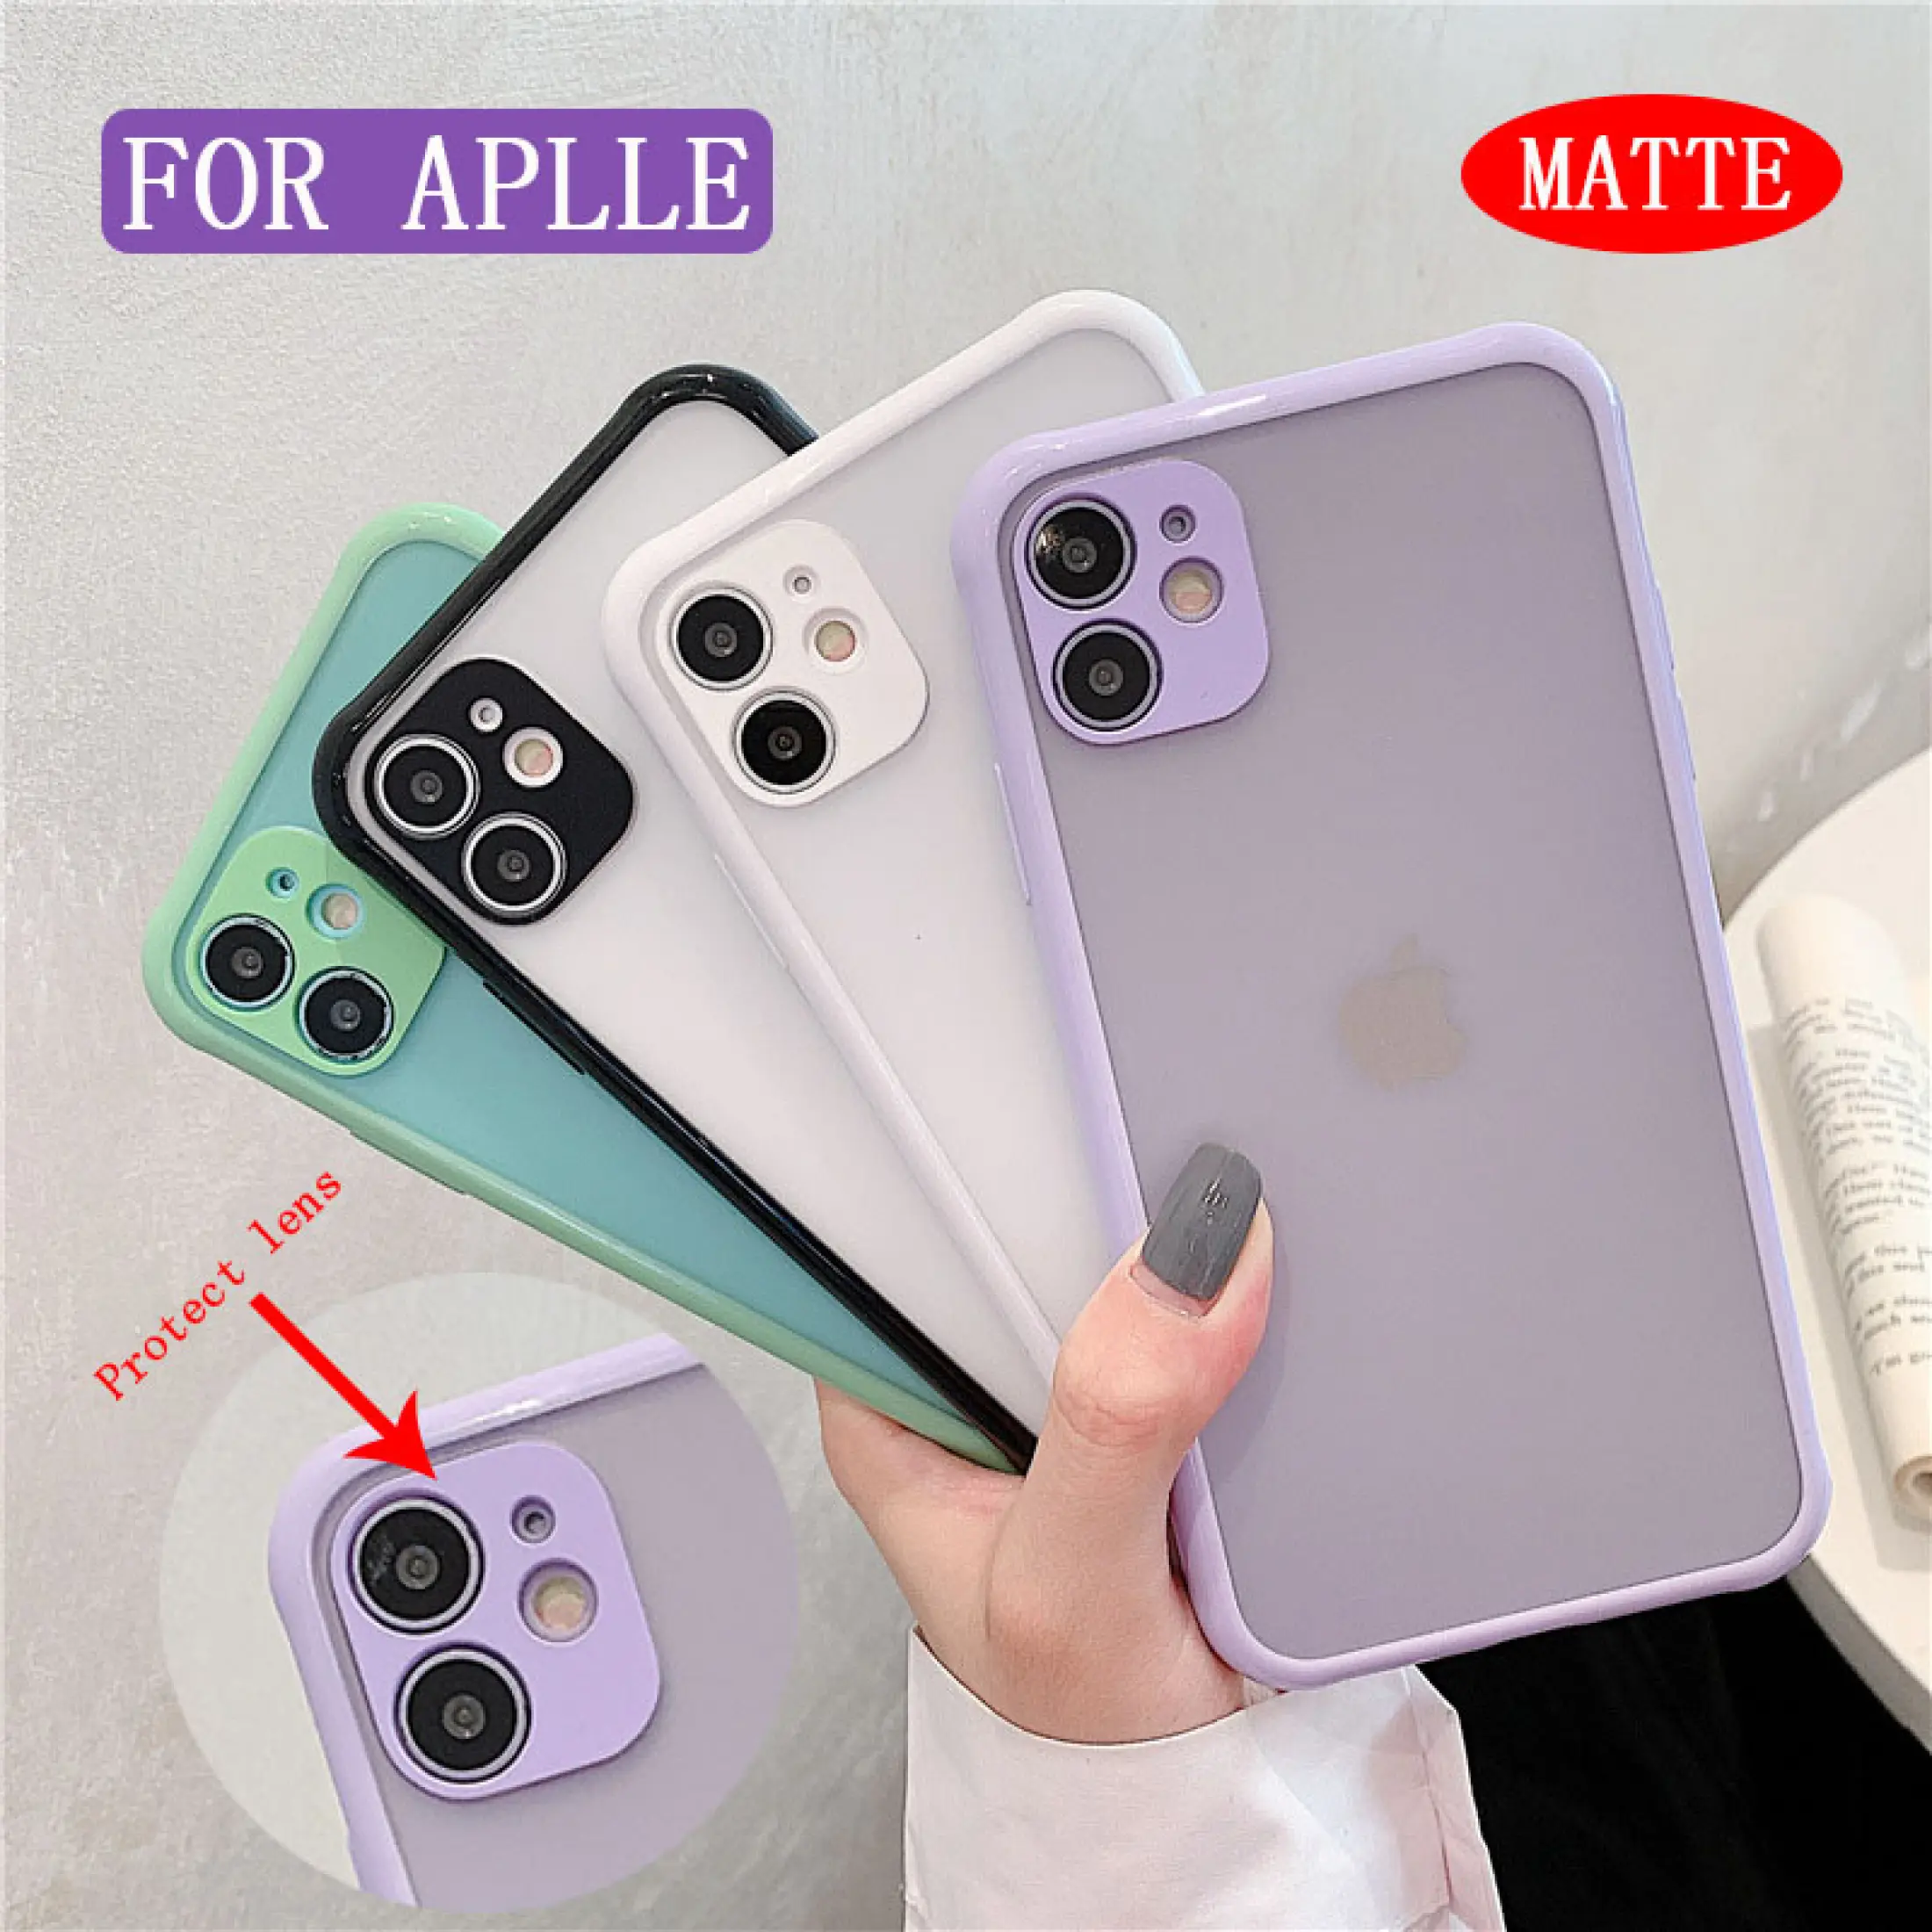 New Promotion Phone Case For Iphone 11 7plus Iphone X Xr Xs Max Frosted Transparent Purple Green Camera All Inclusive Silicone Case Lazada Ph